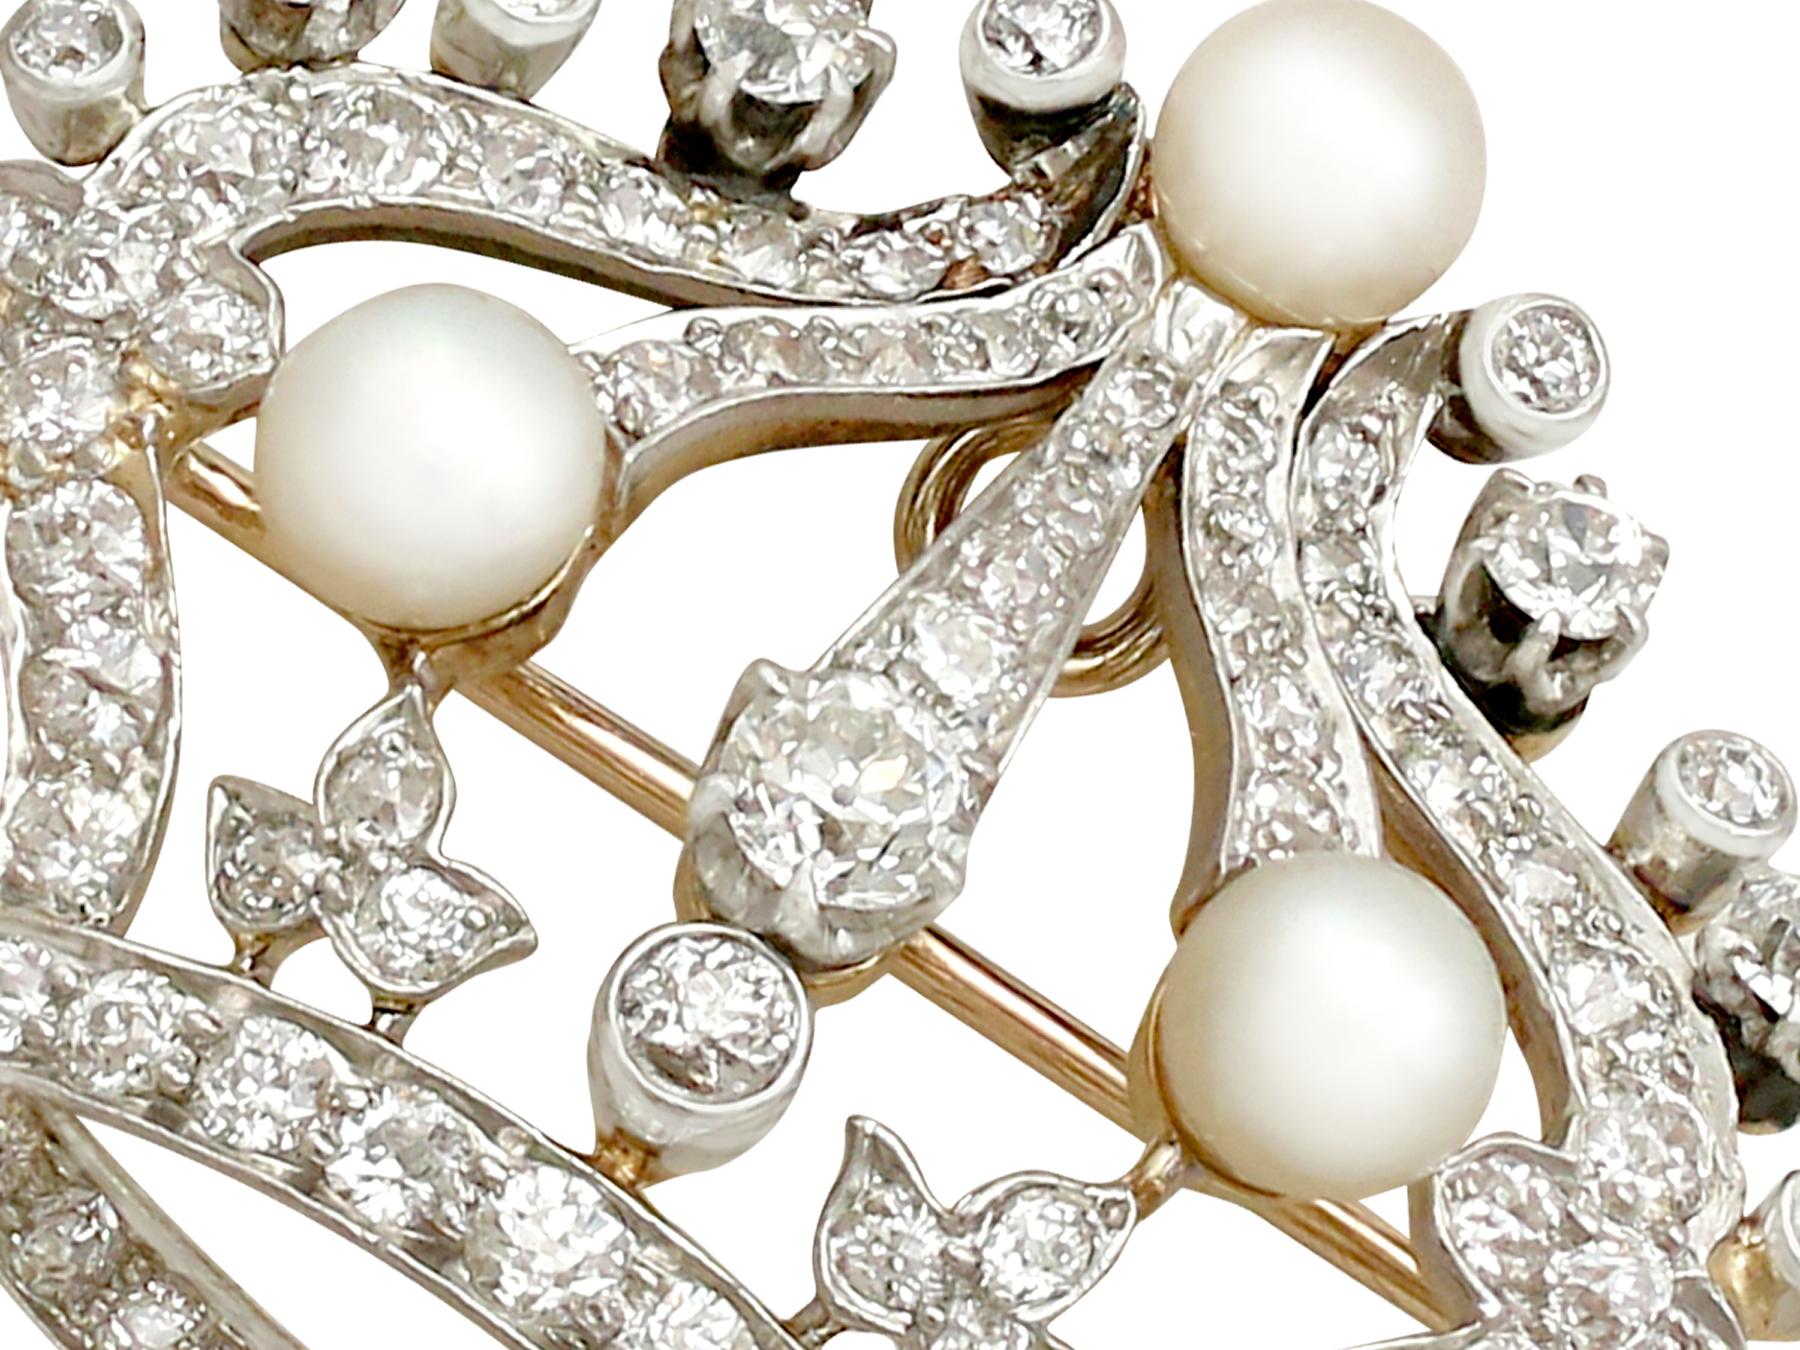 A stunning, fine and impressive antique 2.63 carat diamond and pearl, 14 karat yellow gold and platinum set 'crown' brooch; part of our diverse antique jewellery and estate jewelry collections

This stunning, fine and impressive antique crown brooch